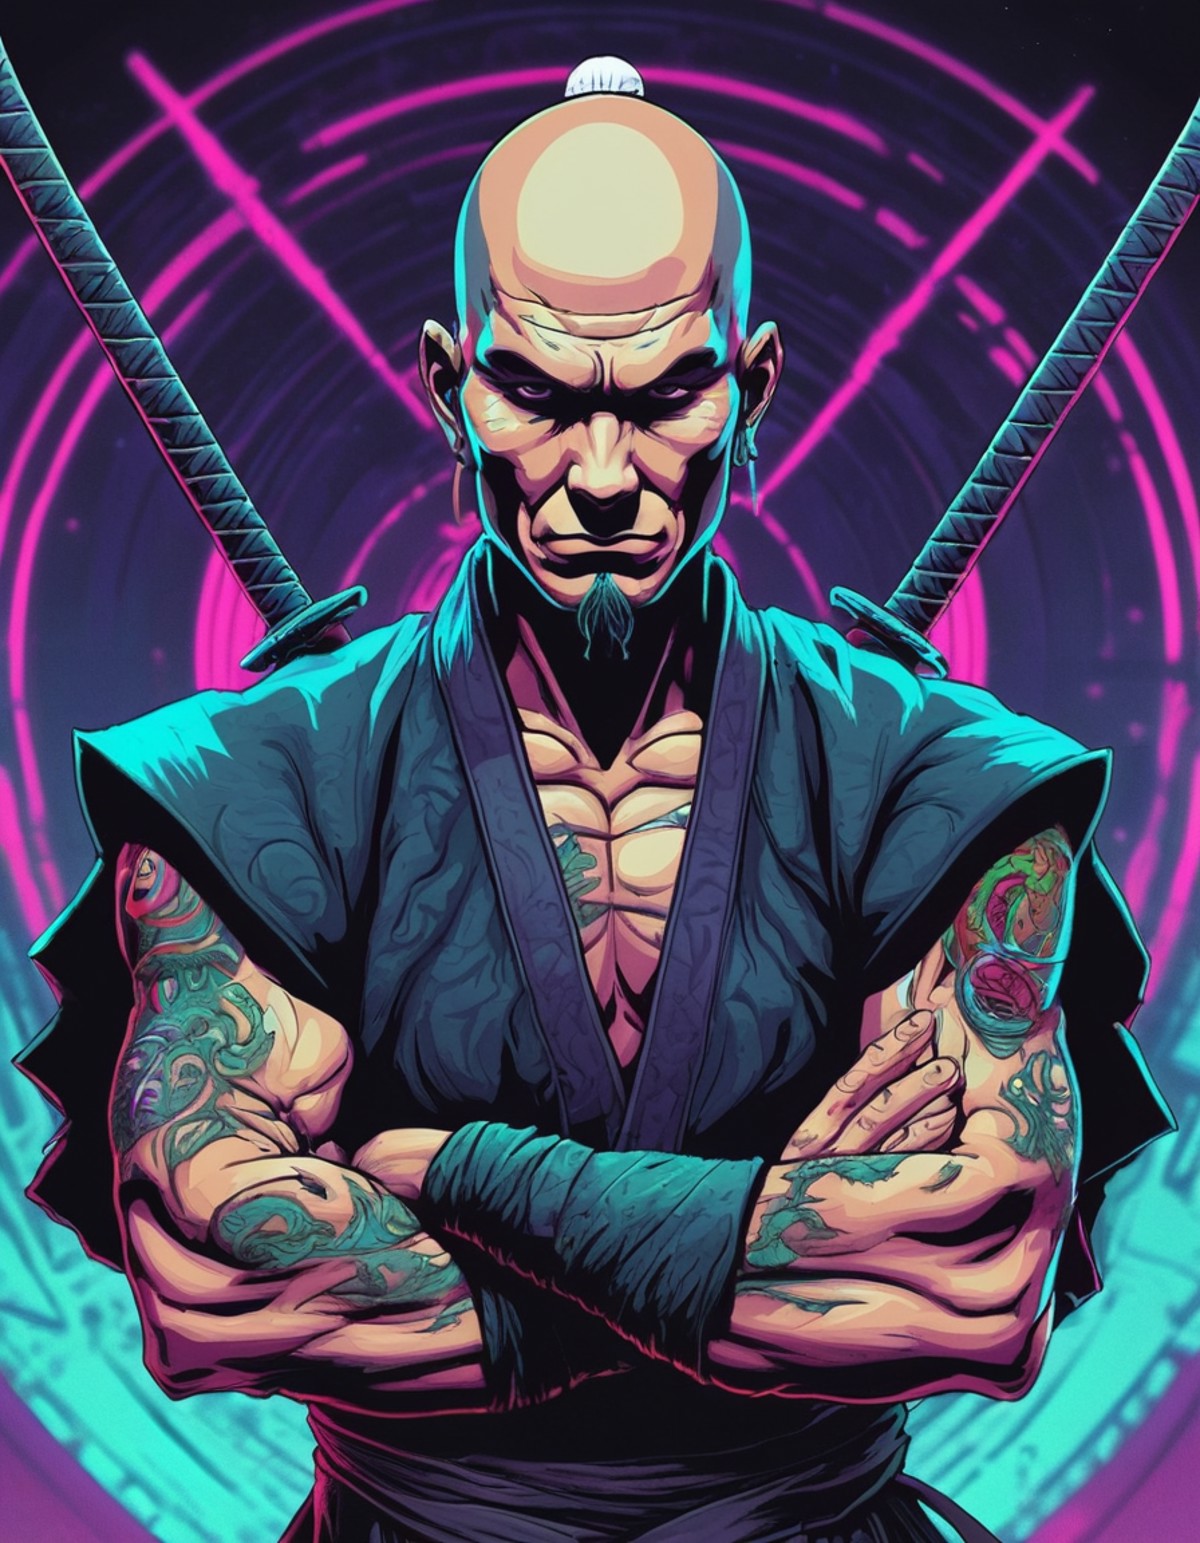 Mythical Guy, wearing Ronin Hazel garb, Crossed arms, his hair is Bald, Psychedelic Art, Synthwave Art, Bardcore, Matt Wag...